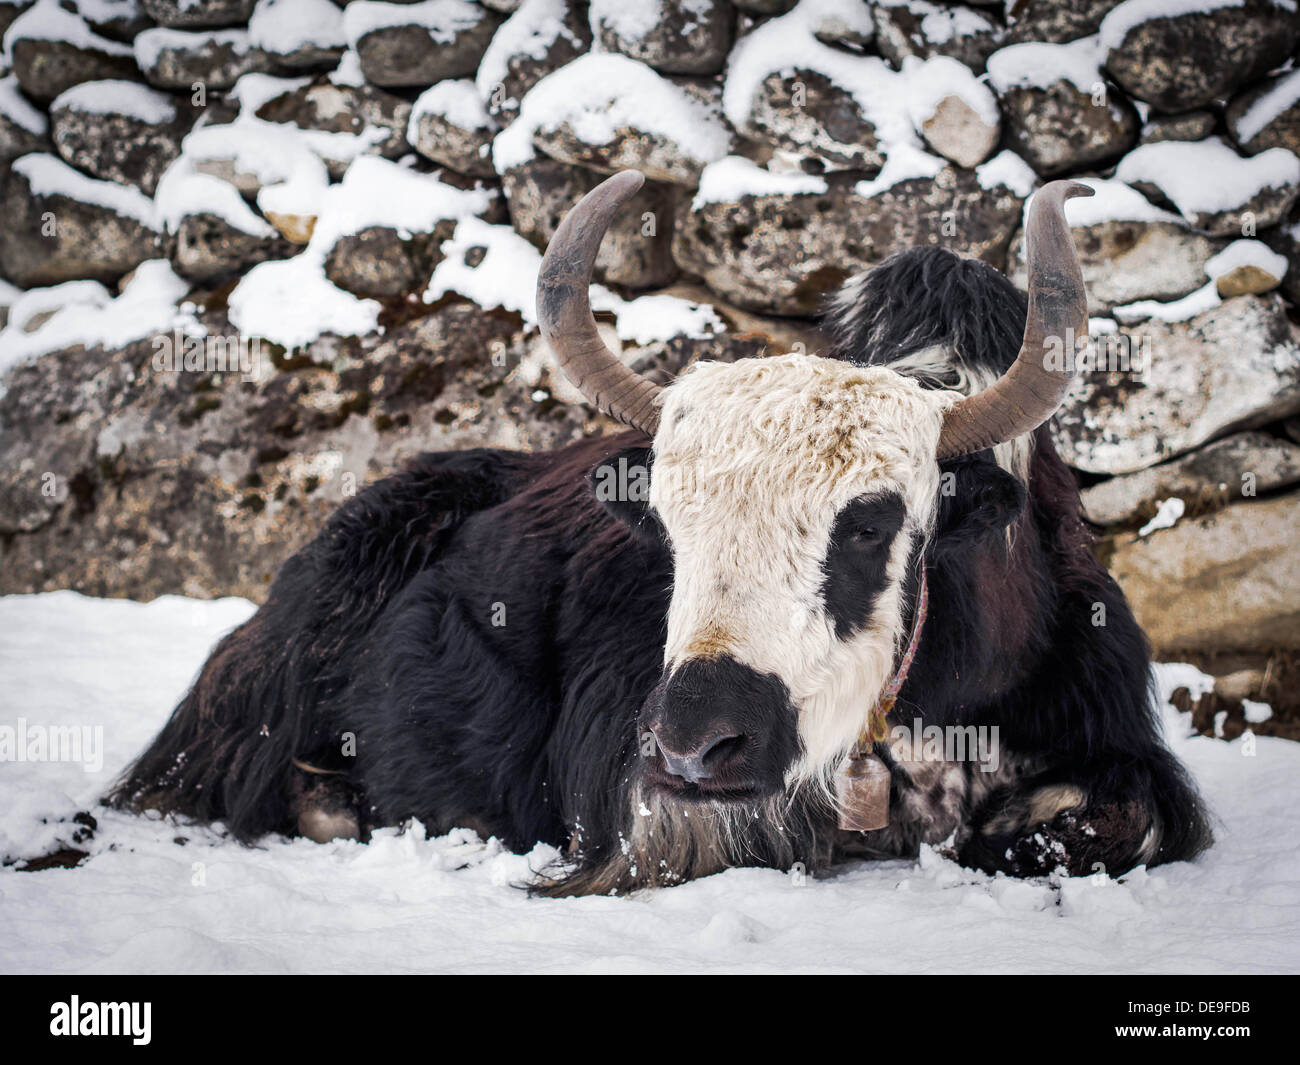 A yak sitting on the snow at a small Himalayan settlement. Stock Photo